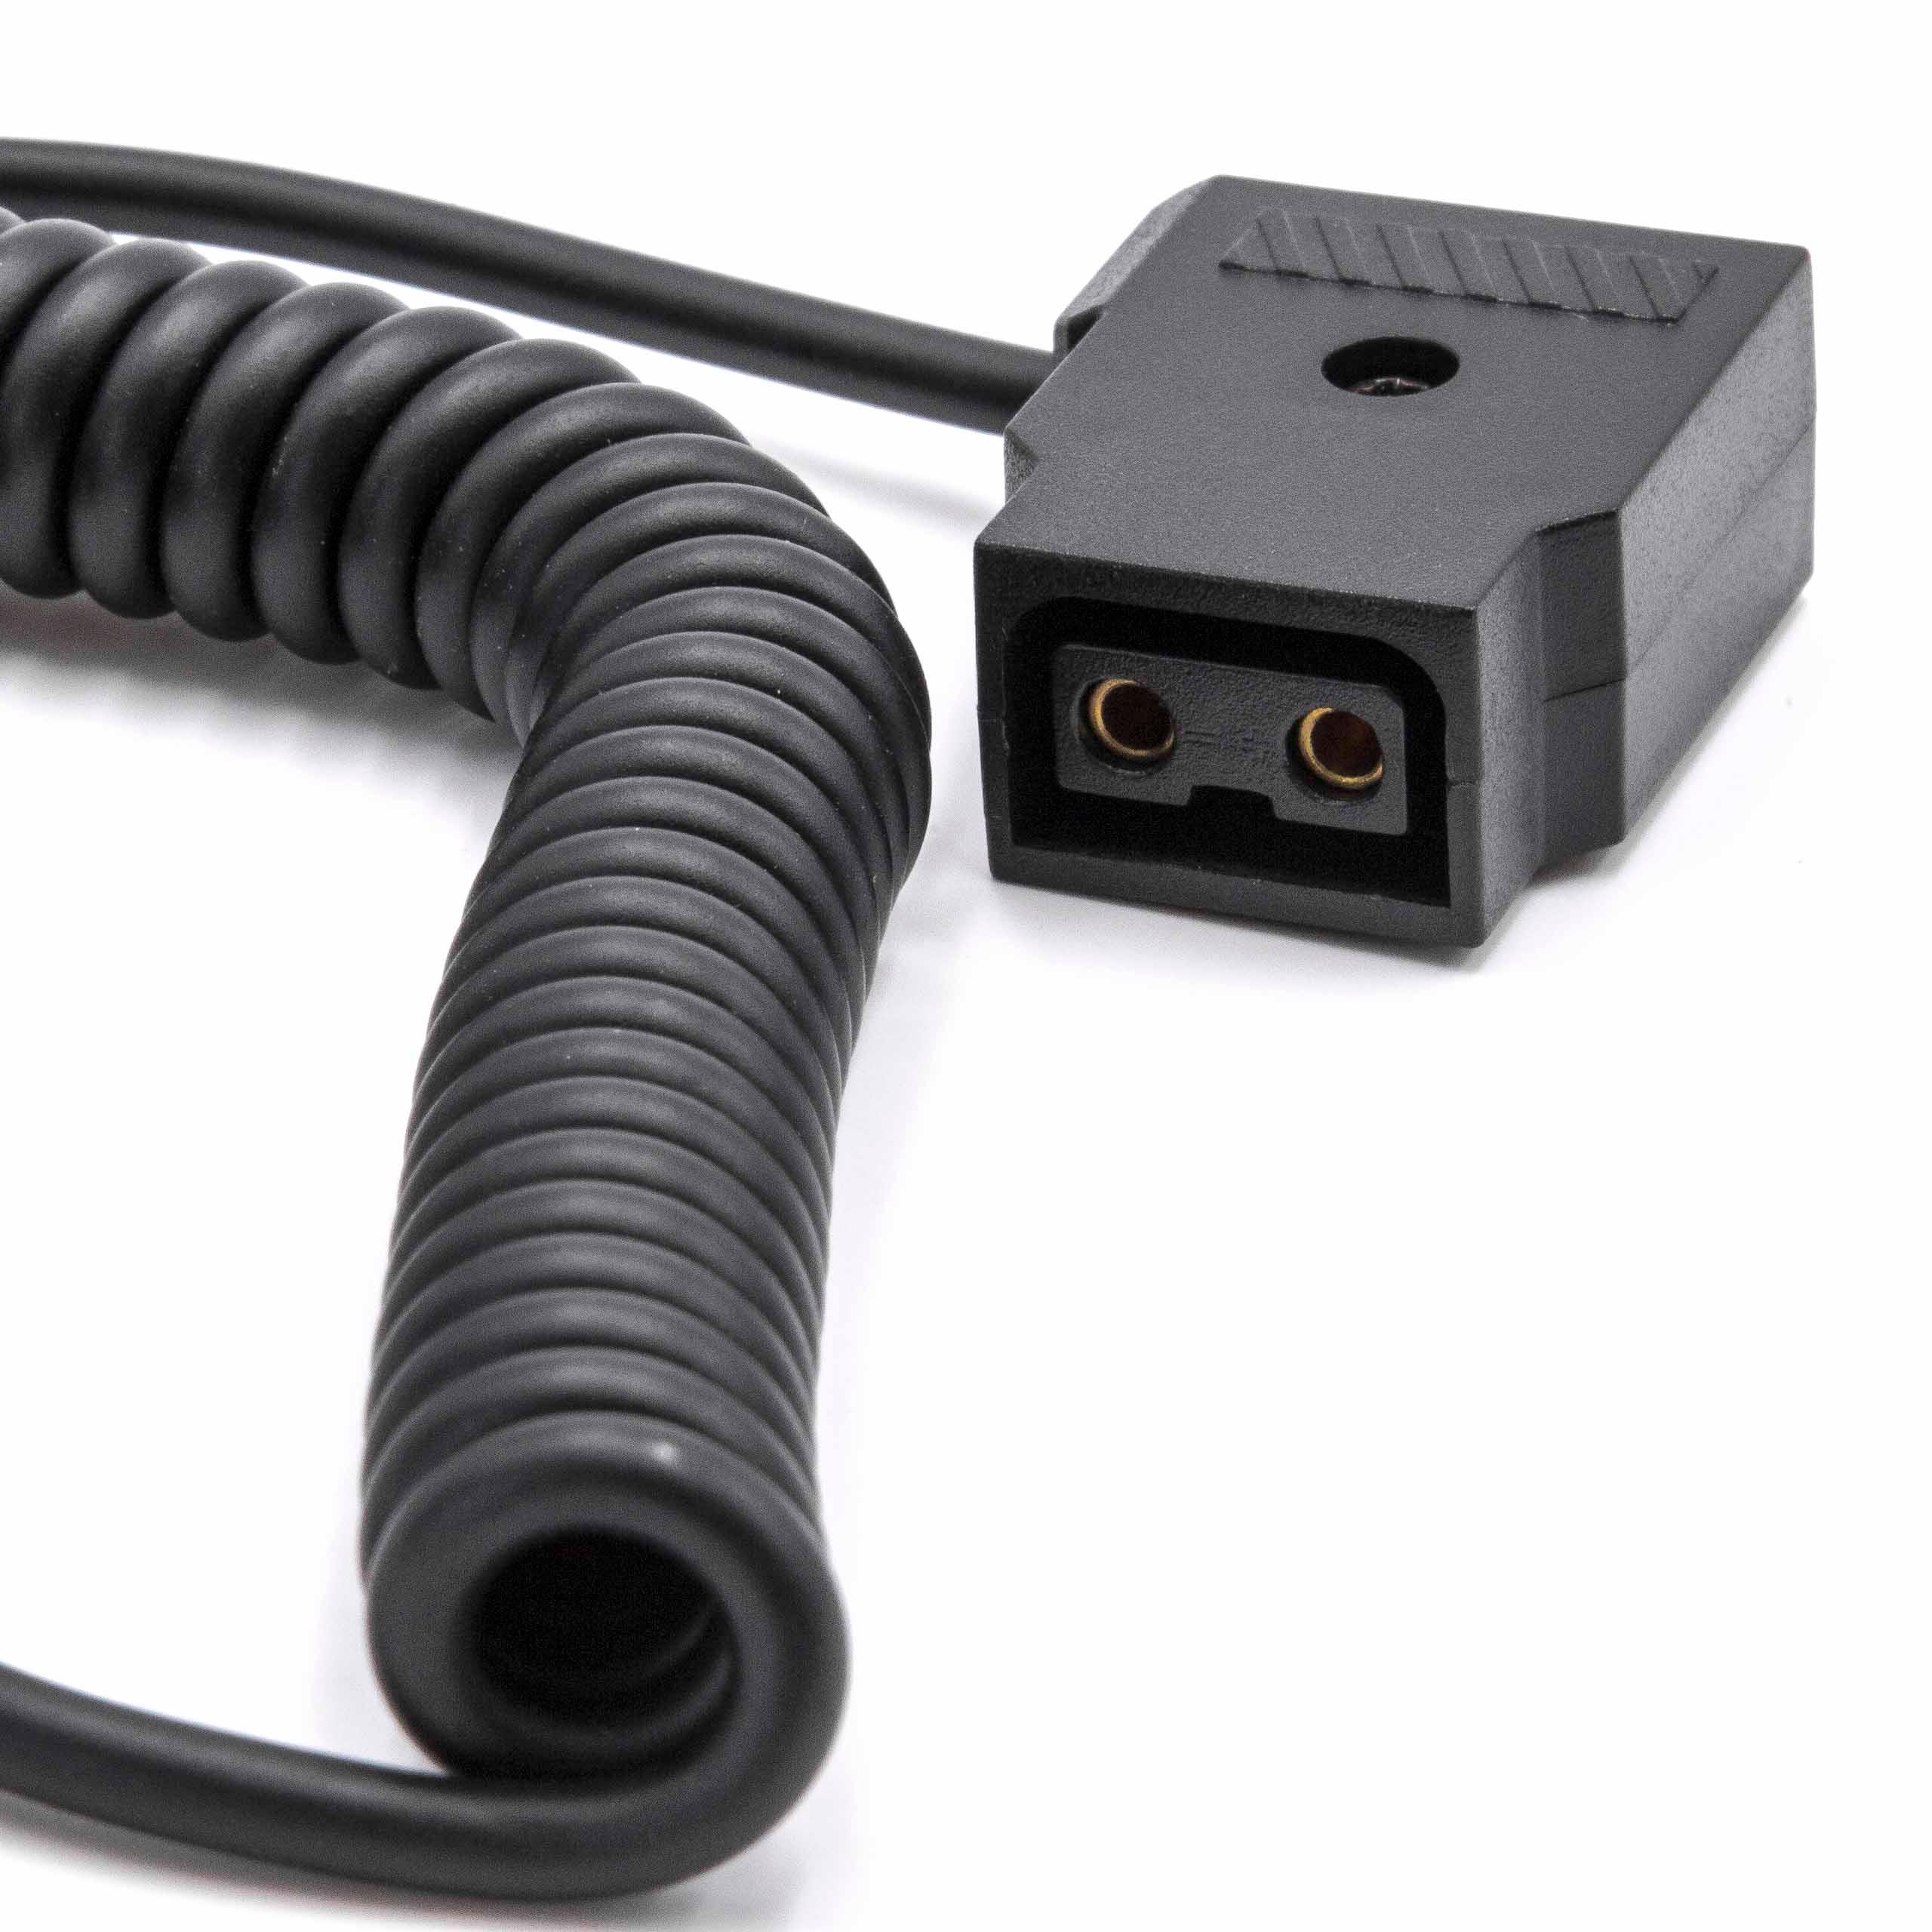 Adapter Cable D-Tap (male) to 1x D-Tap (female) suitable for Anton Bauer Dionic, D-Tap Camera - Black